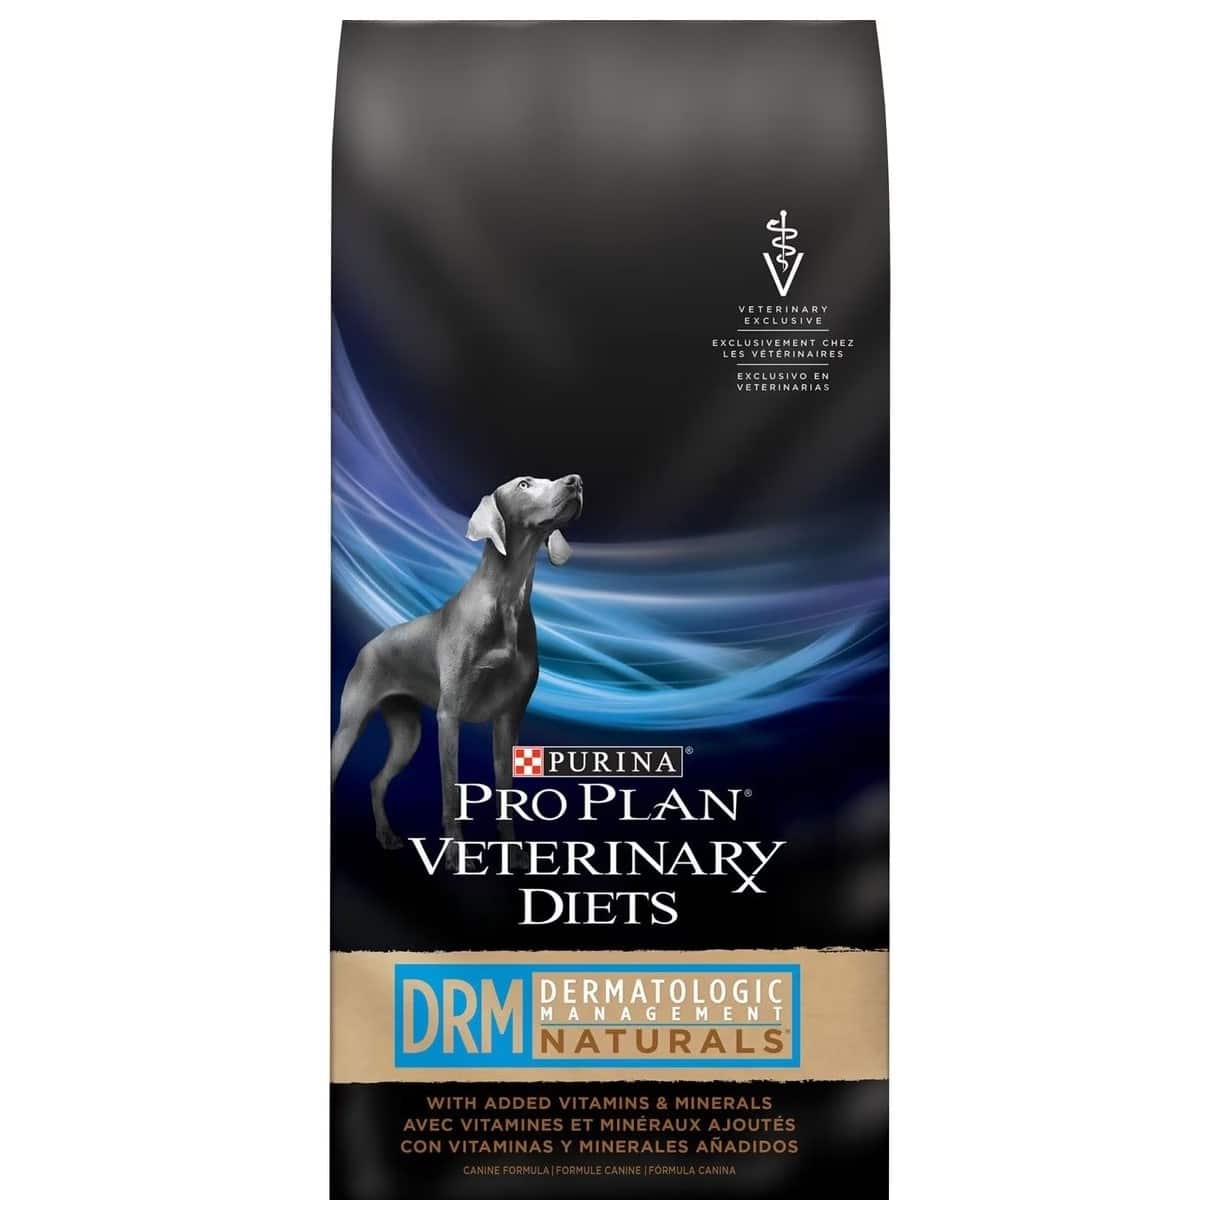 Purina Pro Plan Veterinary Diets DRM Dermatologic Management Naturals Dry Dog Food